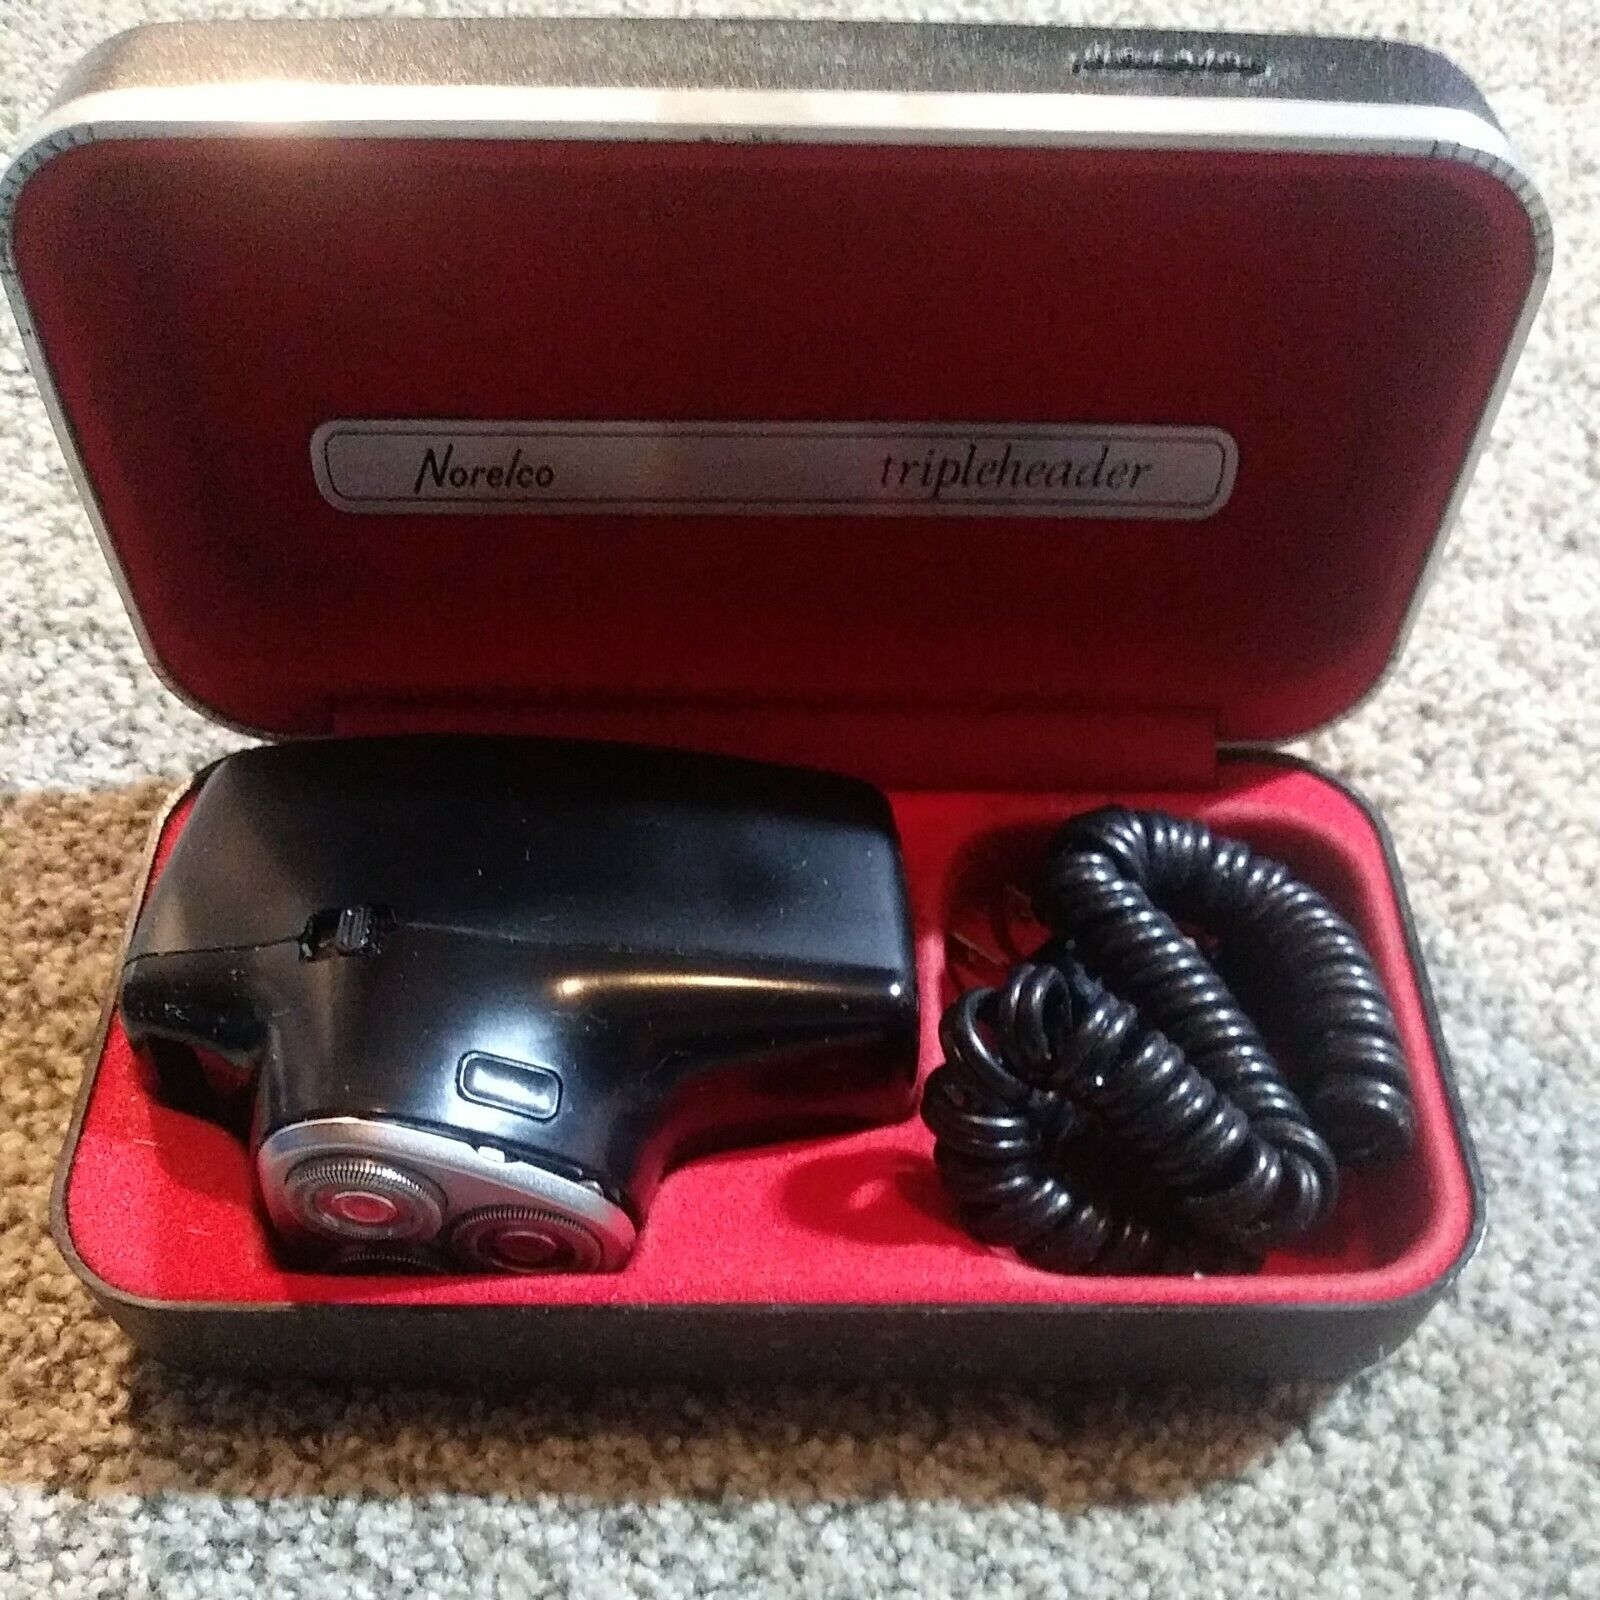 Vintage Norelco Tripleheader Electric Shaver and Box with Power Cord  Works